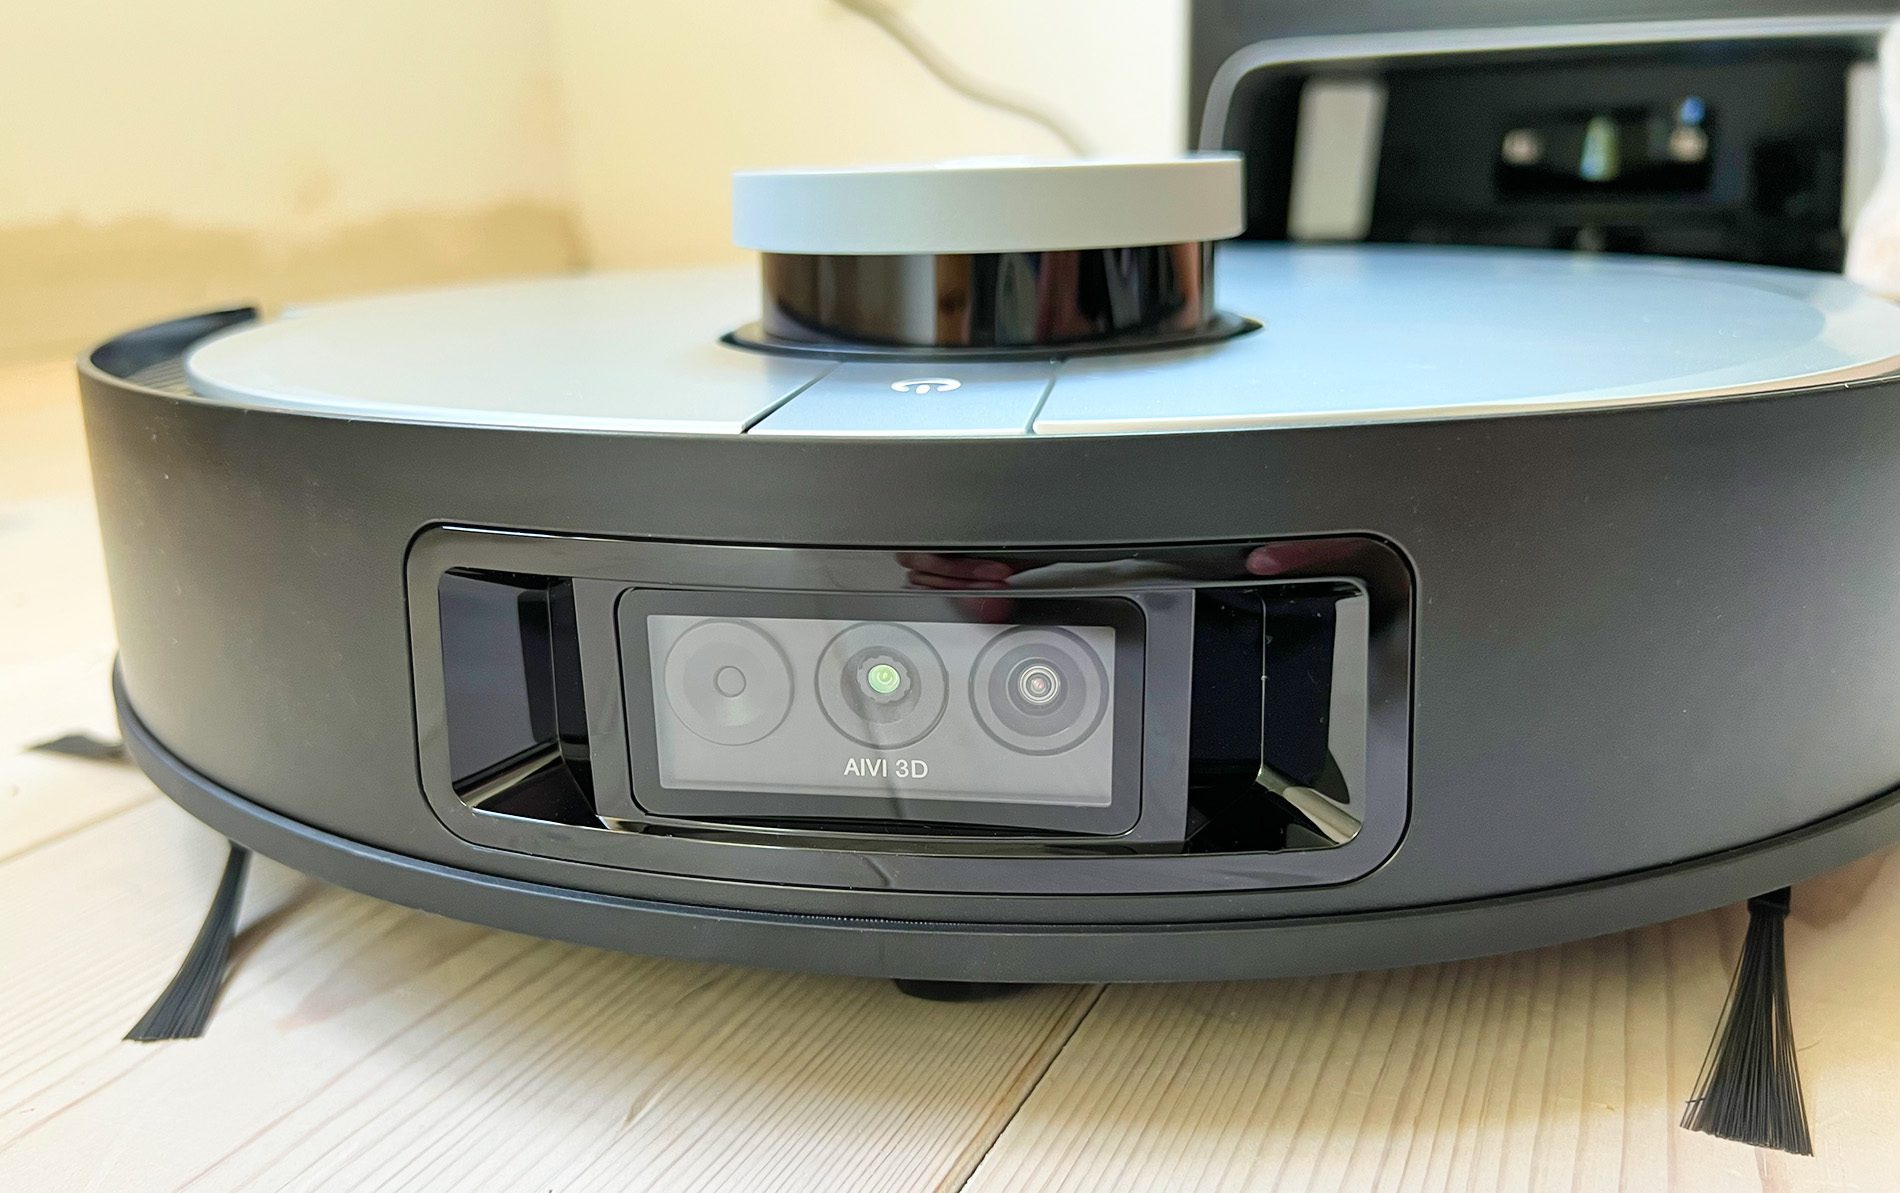 Several sensors and a camera are installed in the front of the Deebot X1 Omni. The robot can also use the sensors to scan the environment in 3D and create a 3D floor plan of the living space.